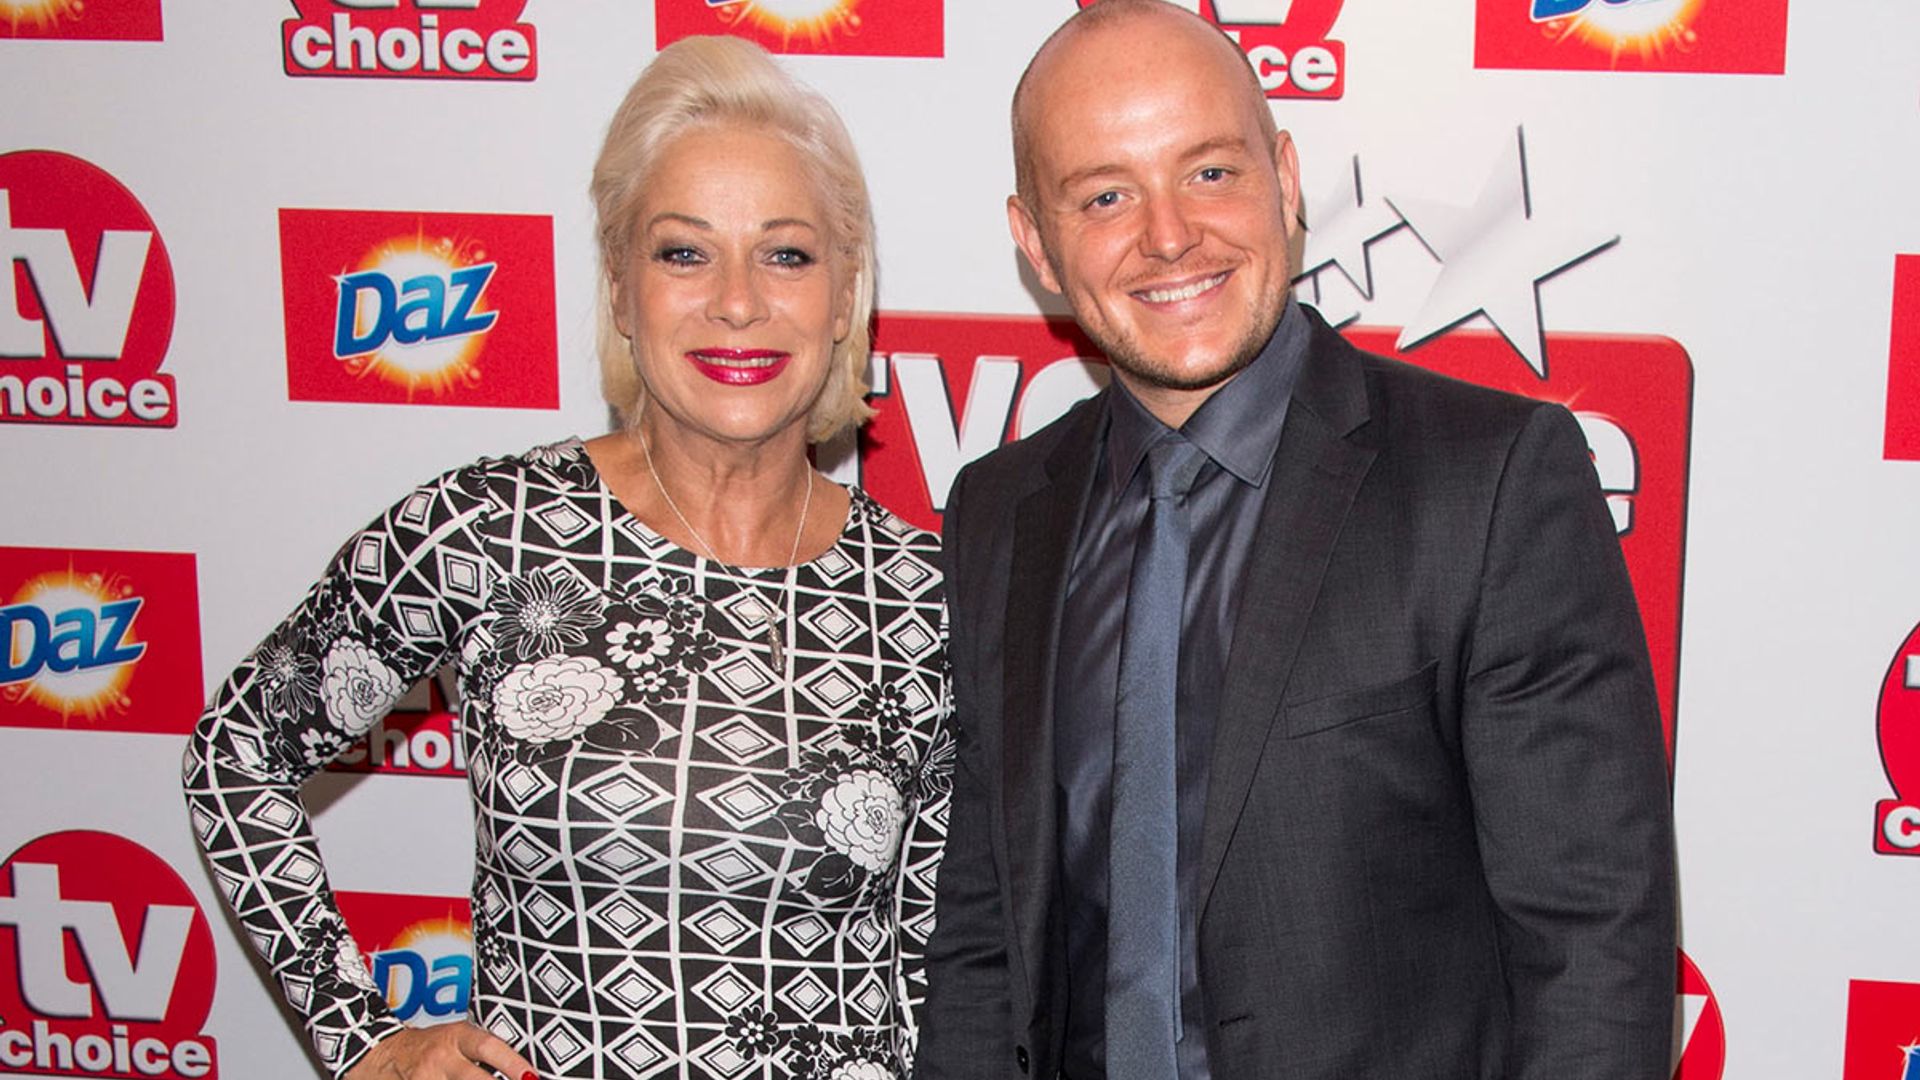 denise welch lincoln townley tv choice